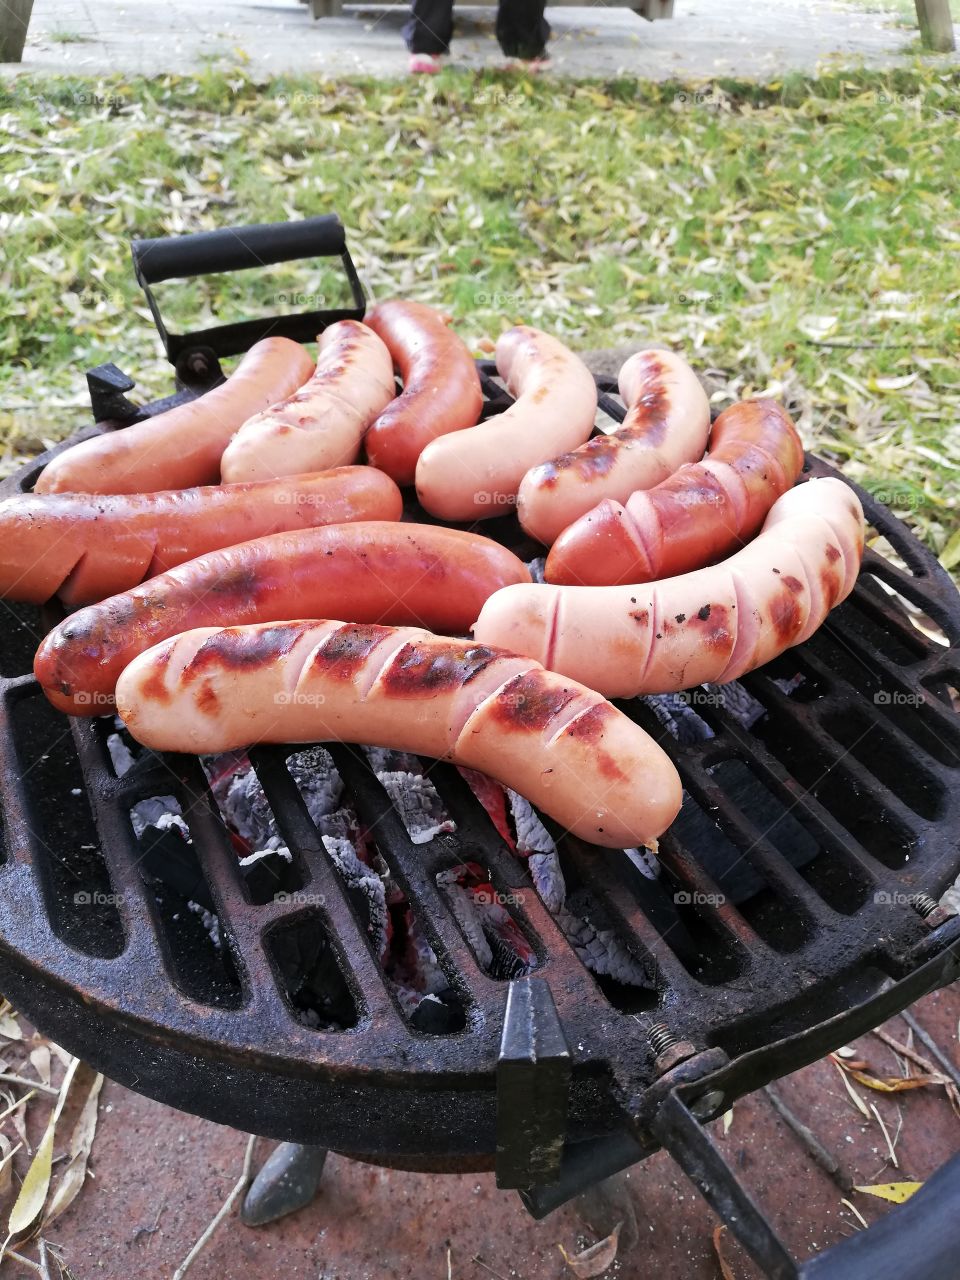 Two kind of sausages cooking on the black grill, made of iron. The ashes and charcoals are glowing red and the heat gives color and crispy surface on the shorties and open the cuts of the skin.